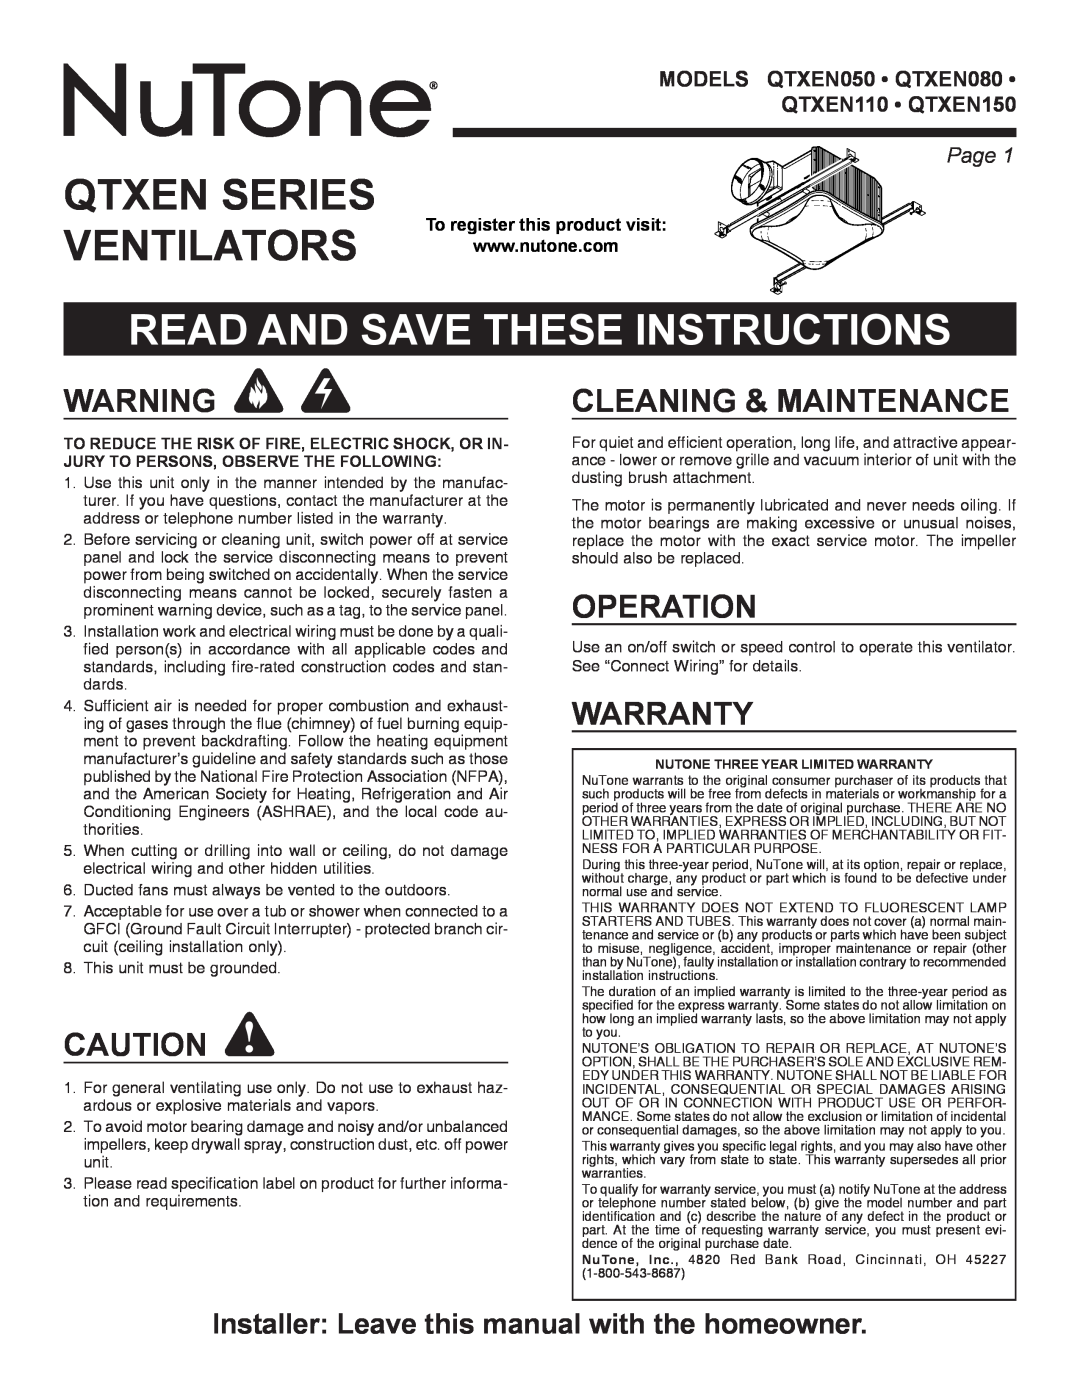 NuTone QTXEN050 manual Qtxen Series Ventilators, Read And Save These Instructions, Cleaning & Maintenance, Operation, Page 